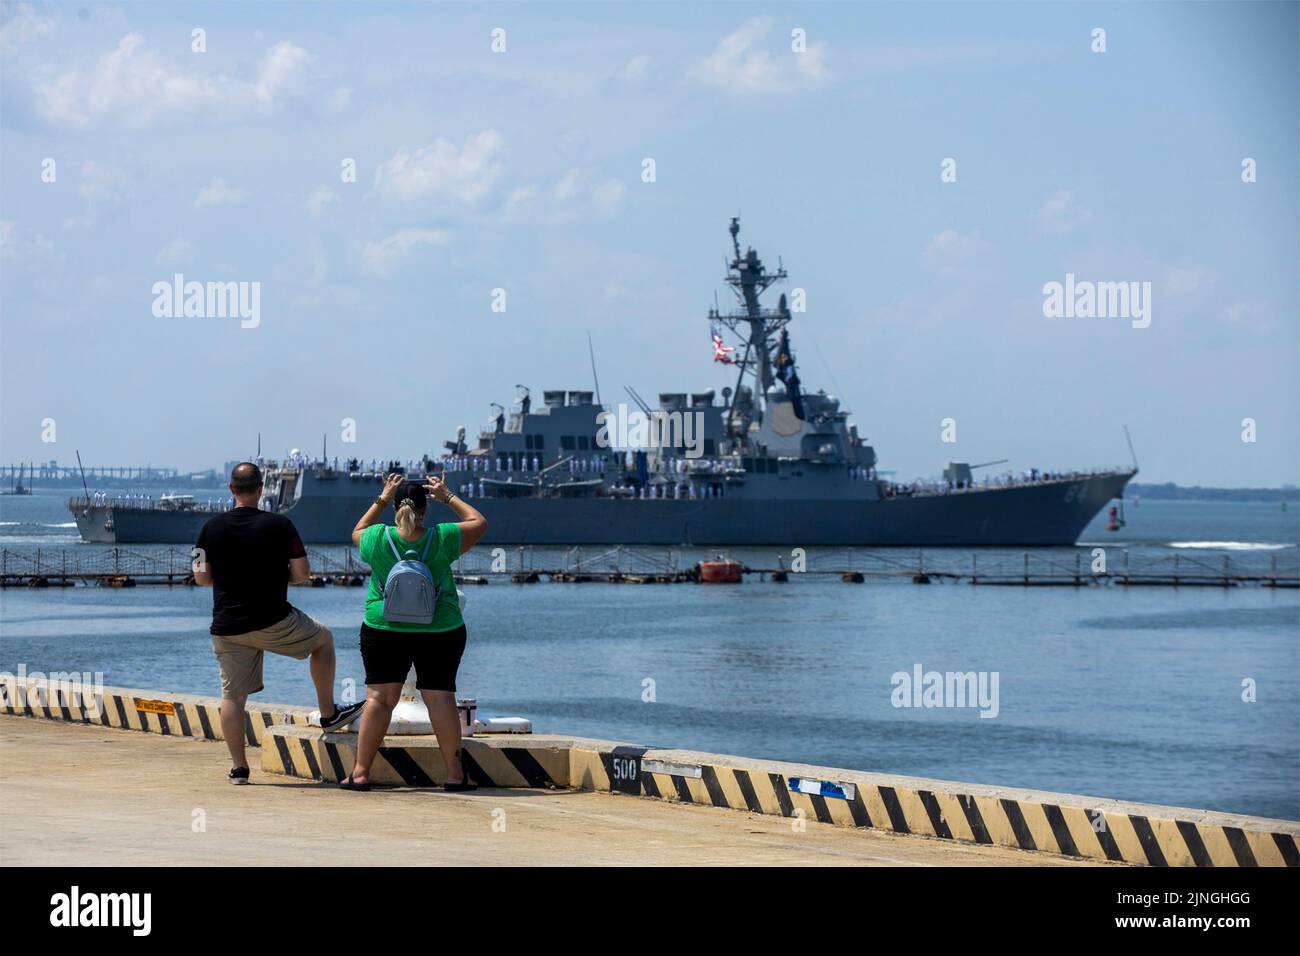 Family members watch as the U.S. Navy Arleigh Burke-class guided-missile destroyer USS Bulkeley departs Naval Station Norfolk during routine operations, August 4, 2022 in Norfork, Virginia. Stock Photo